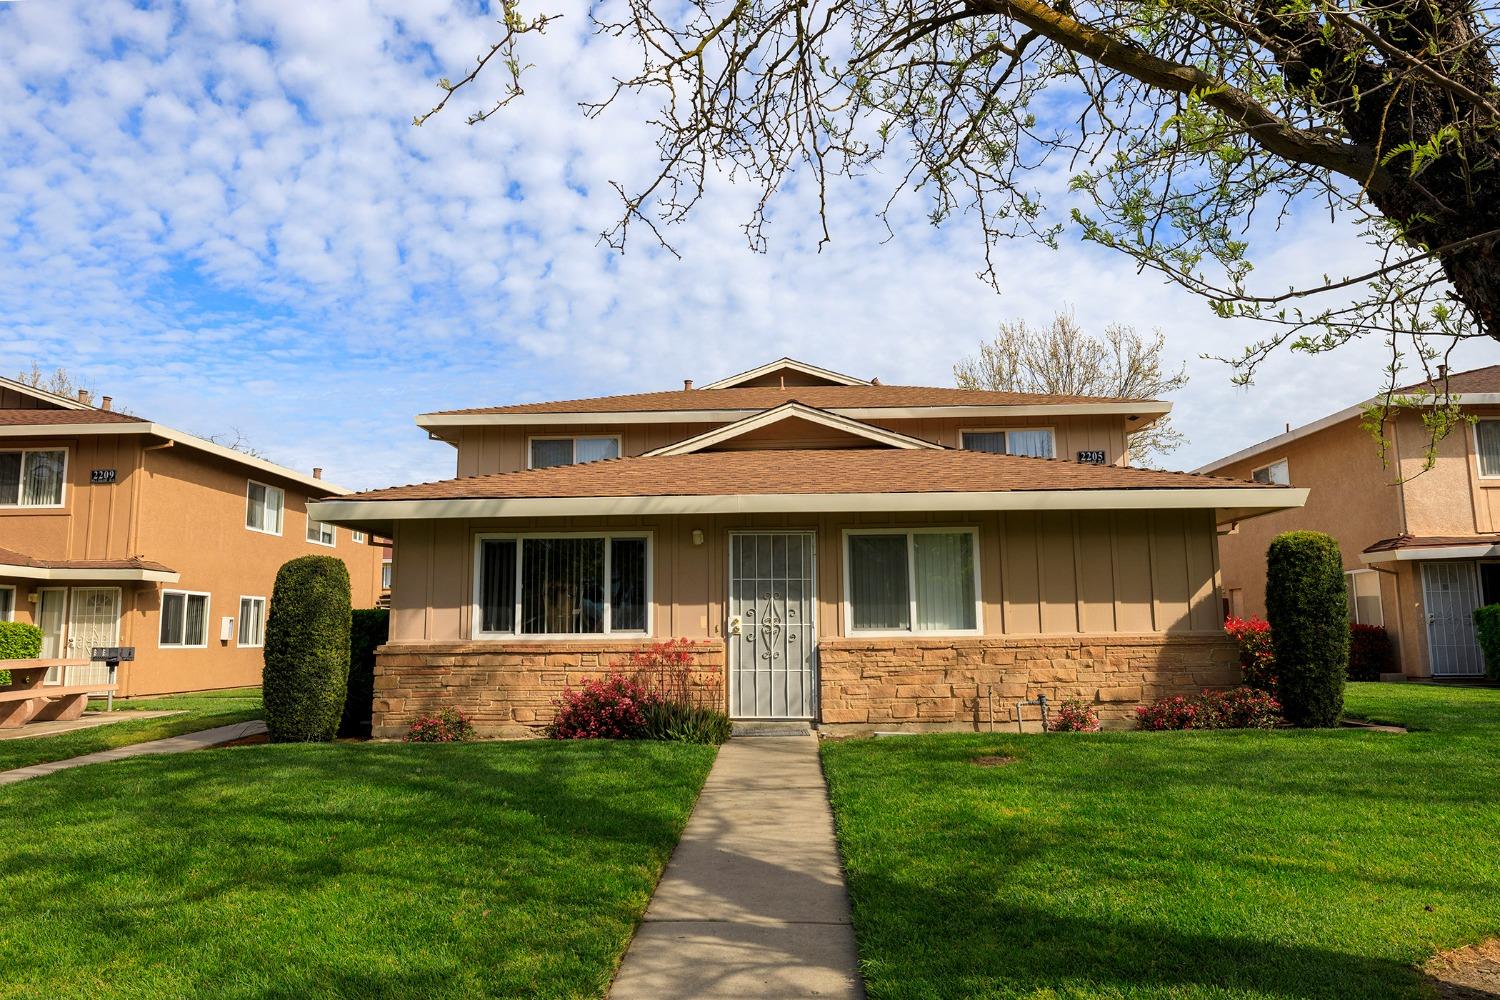 Photo of 2205 Palisade Ave in Modesto, CA